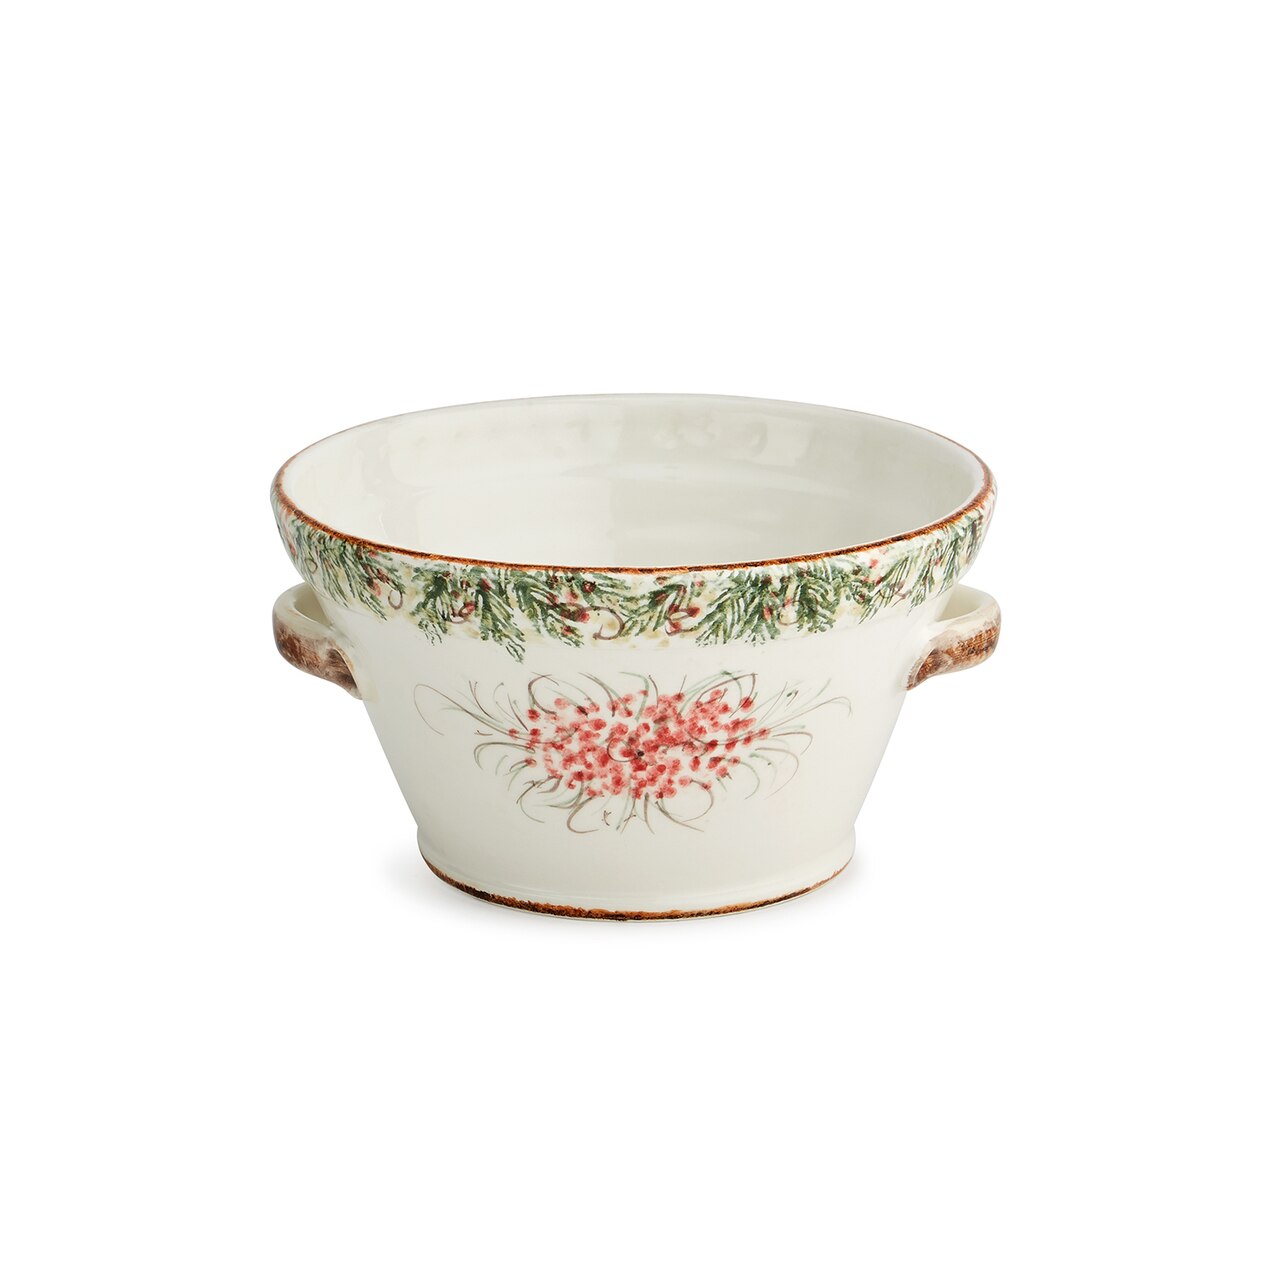 Natale Small Handled Bowl